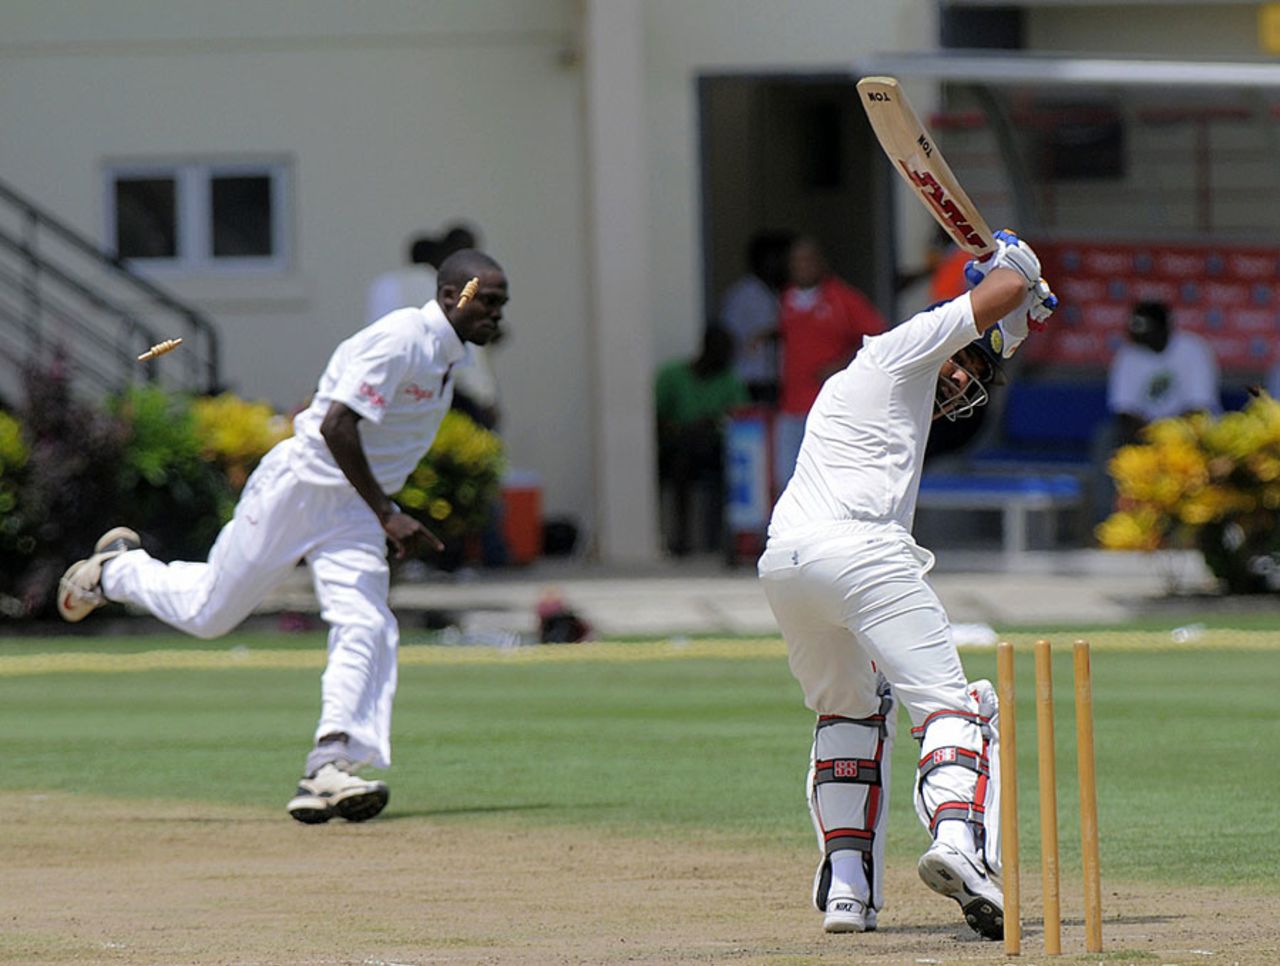 Rohit Sharma was bowled by Jonathan Carter while shouldering arms, West Indies A v India A, 3rd unofficial Test, St Lucia, 1st day, June 16, 2012